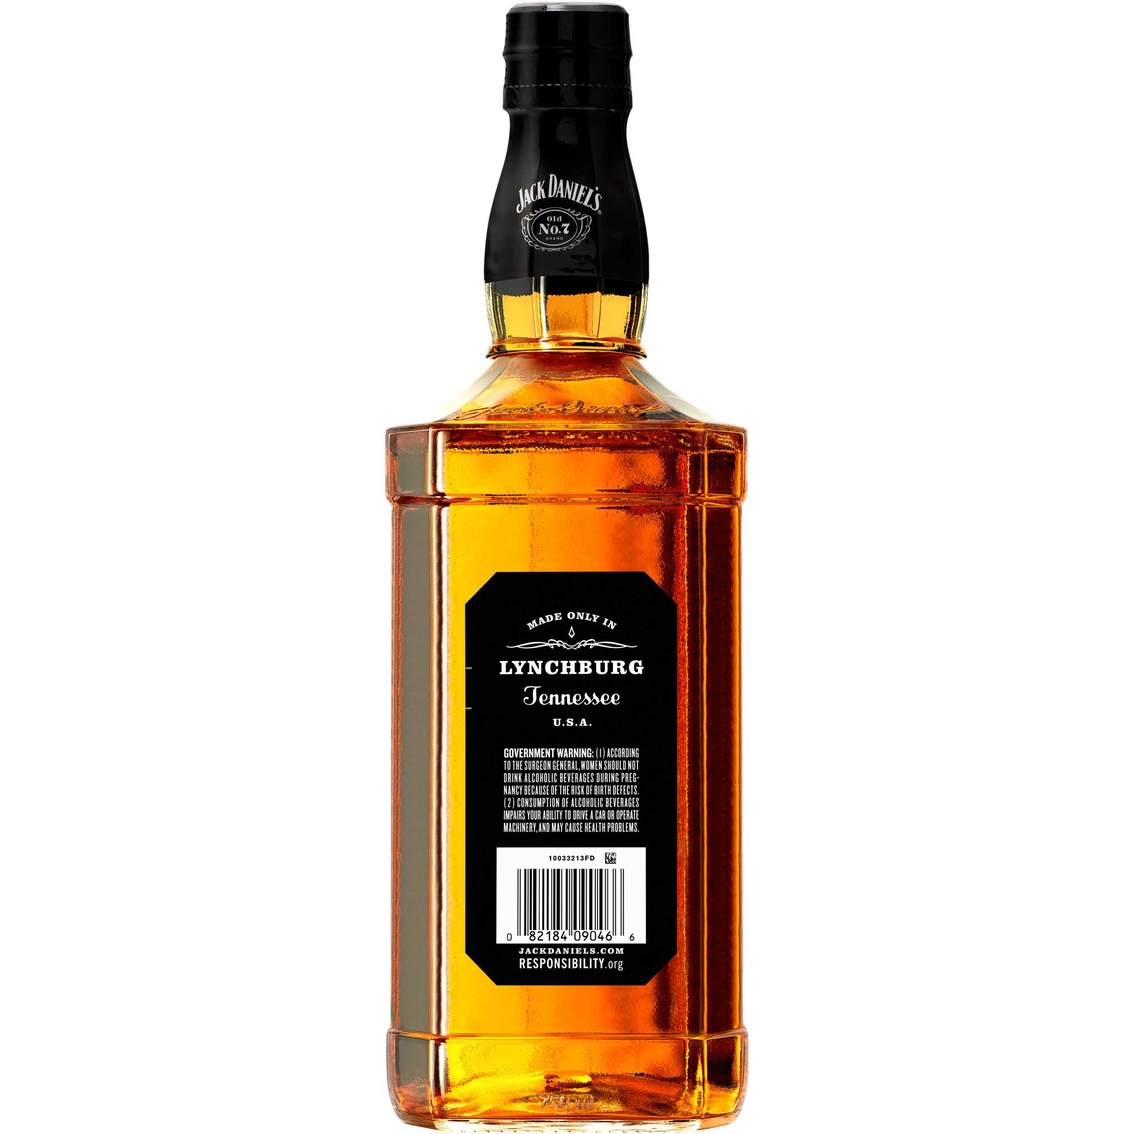 Jack Daniels Tennessee Whiskey 750ml - Image 2 of 2